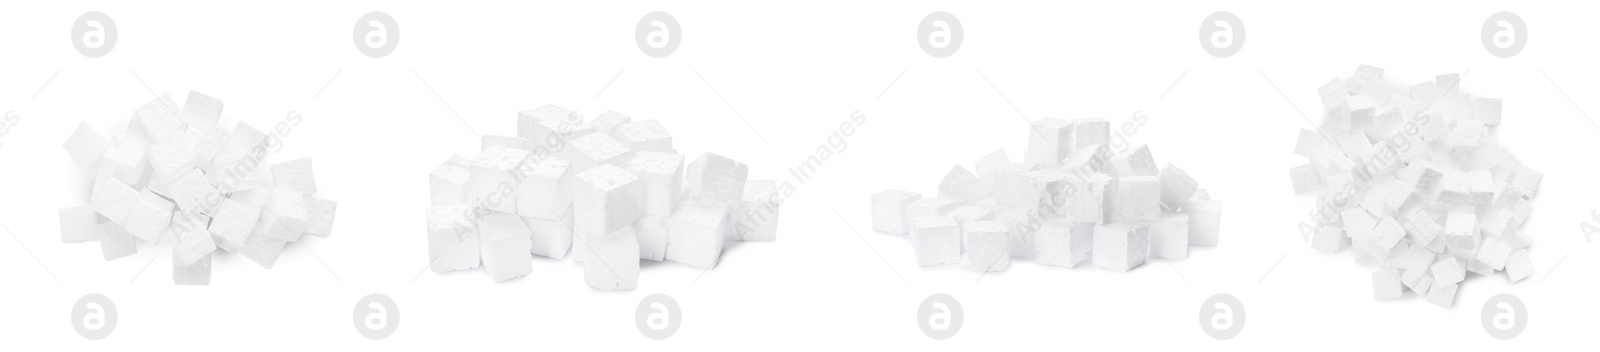 Image of Set with piles of styrofoam cubes on white background. Banner design